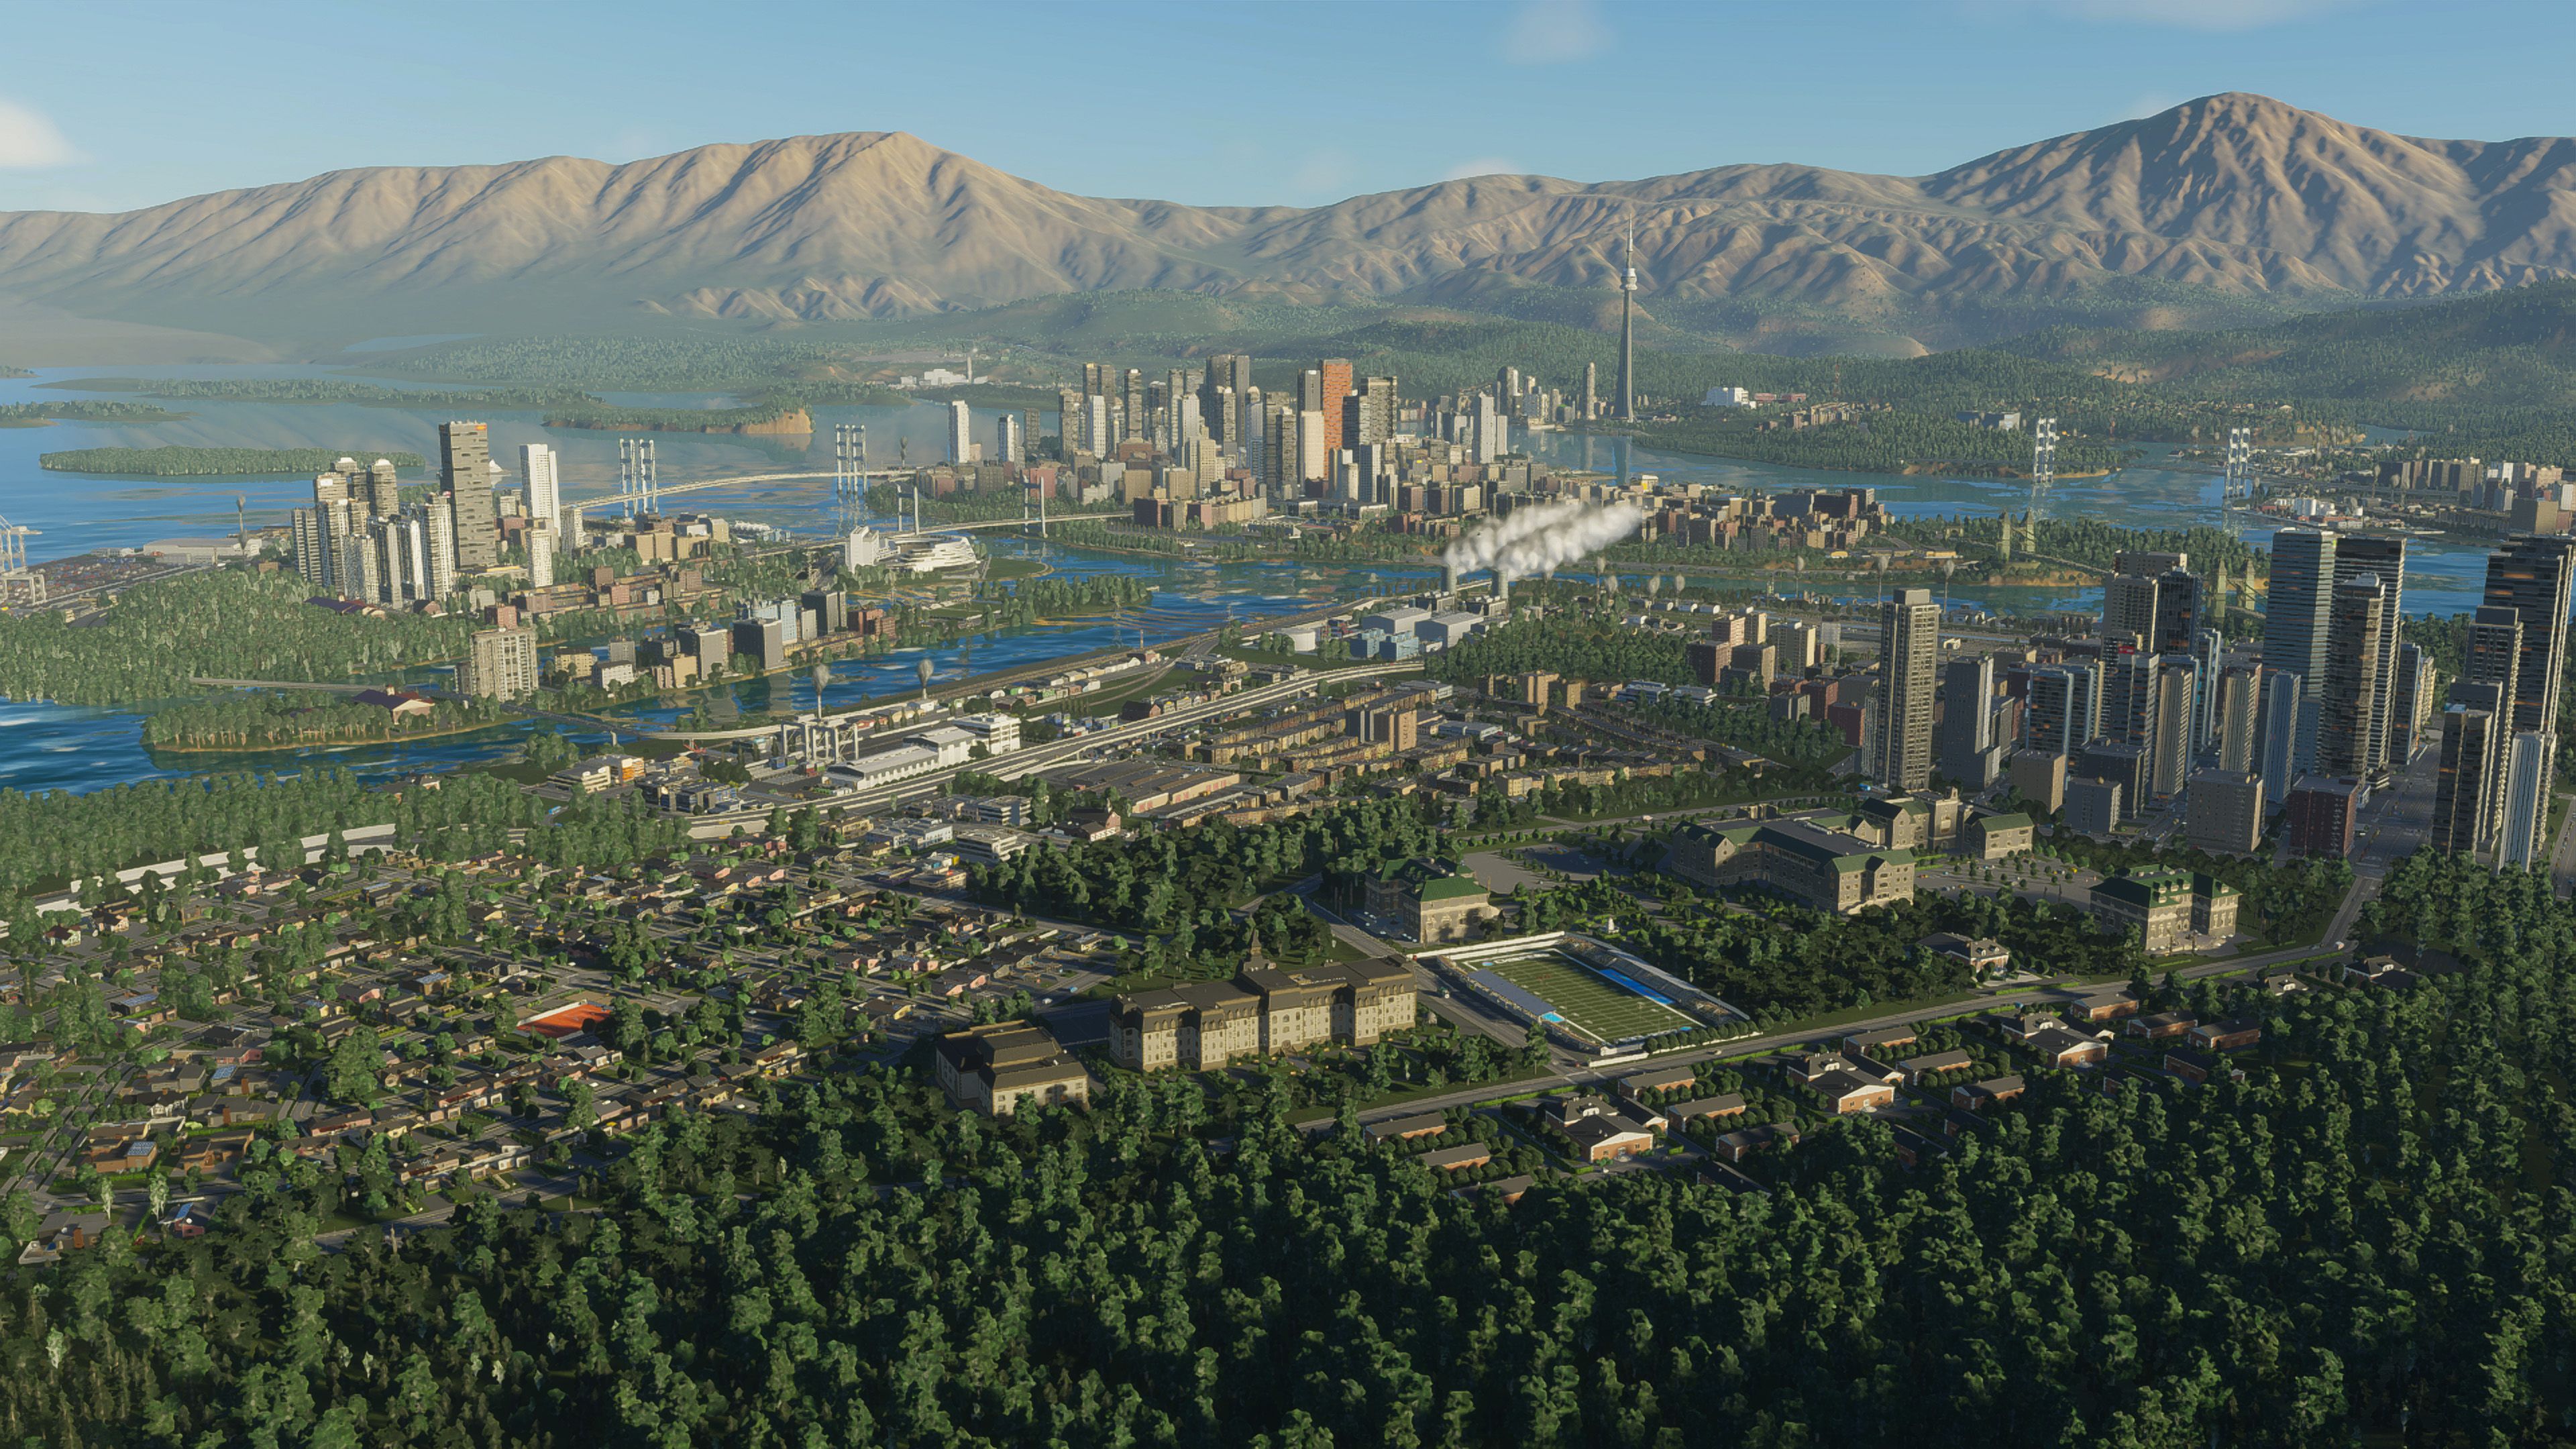 GameNonStop promoting Cities: Skylines 2 is packed with customers